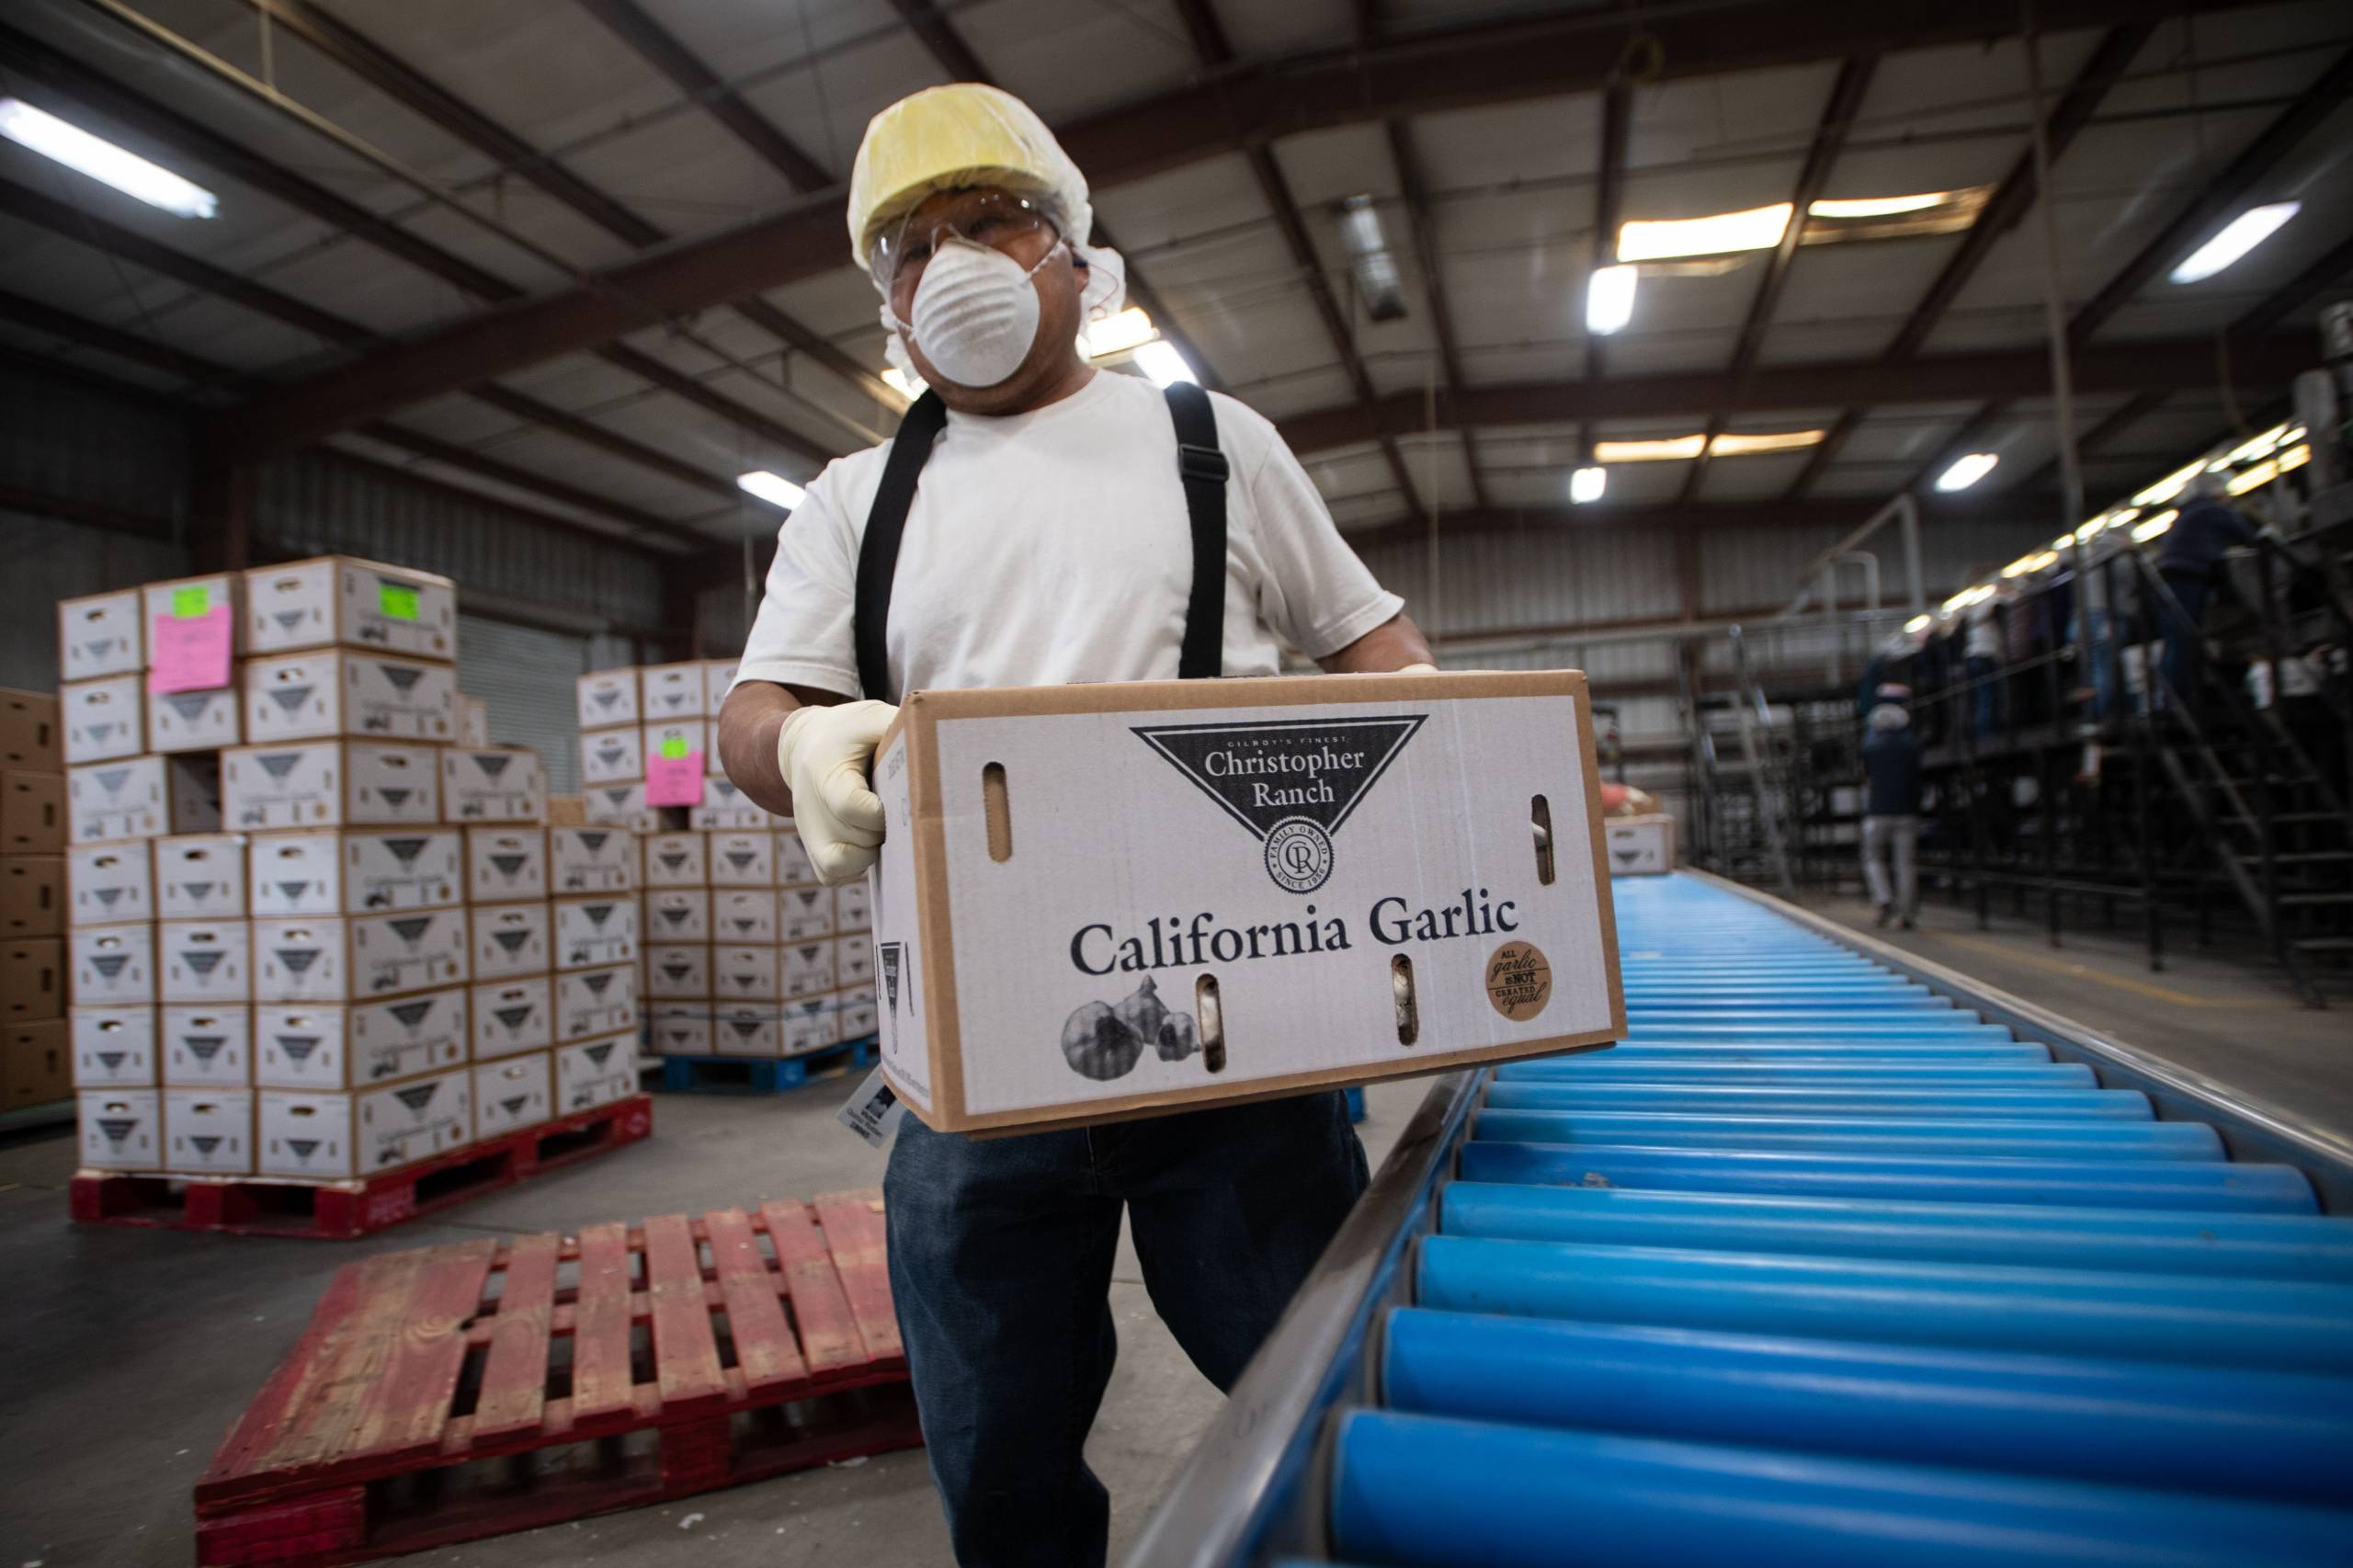 A worker wears a helmet and a face mask as they carry a heavy cardboard box through a factory.